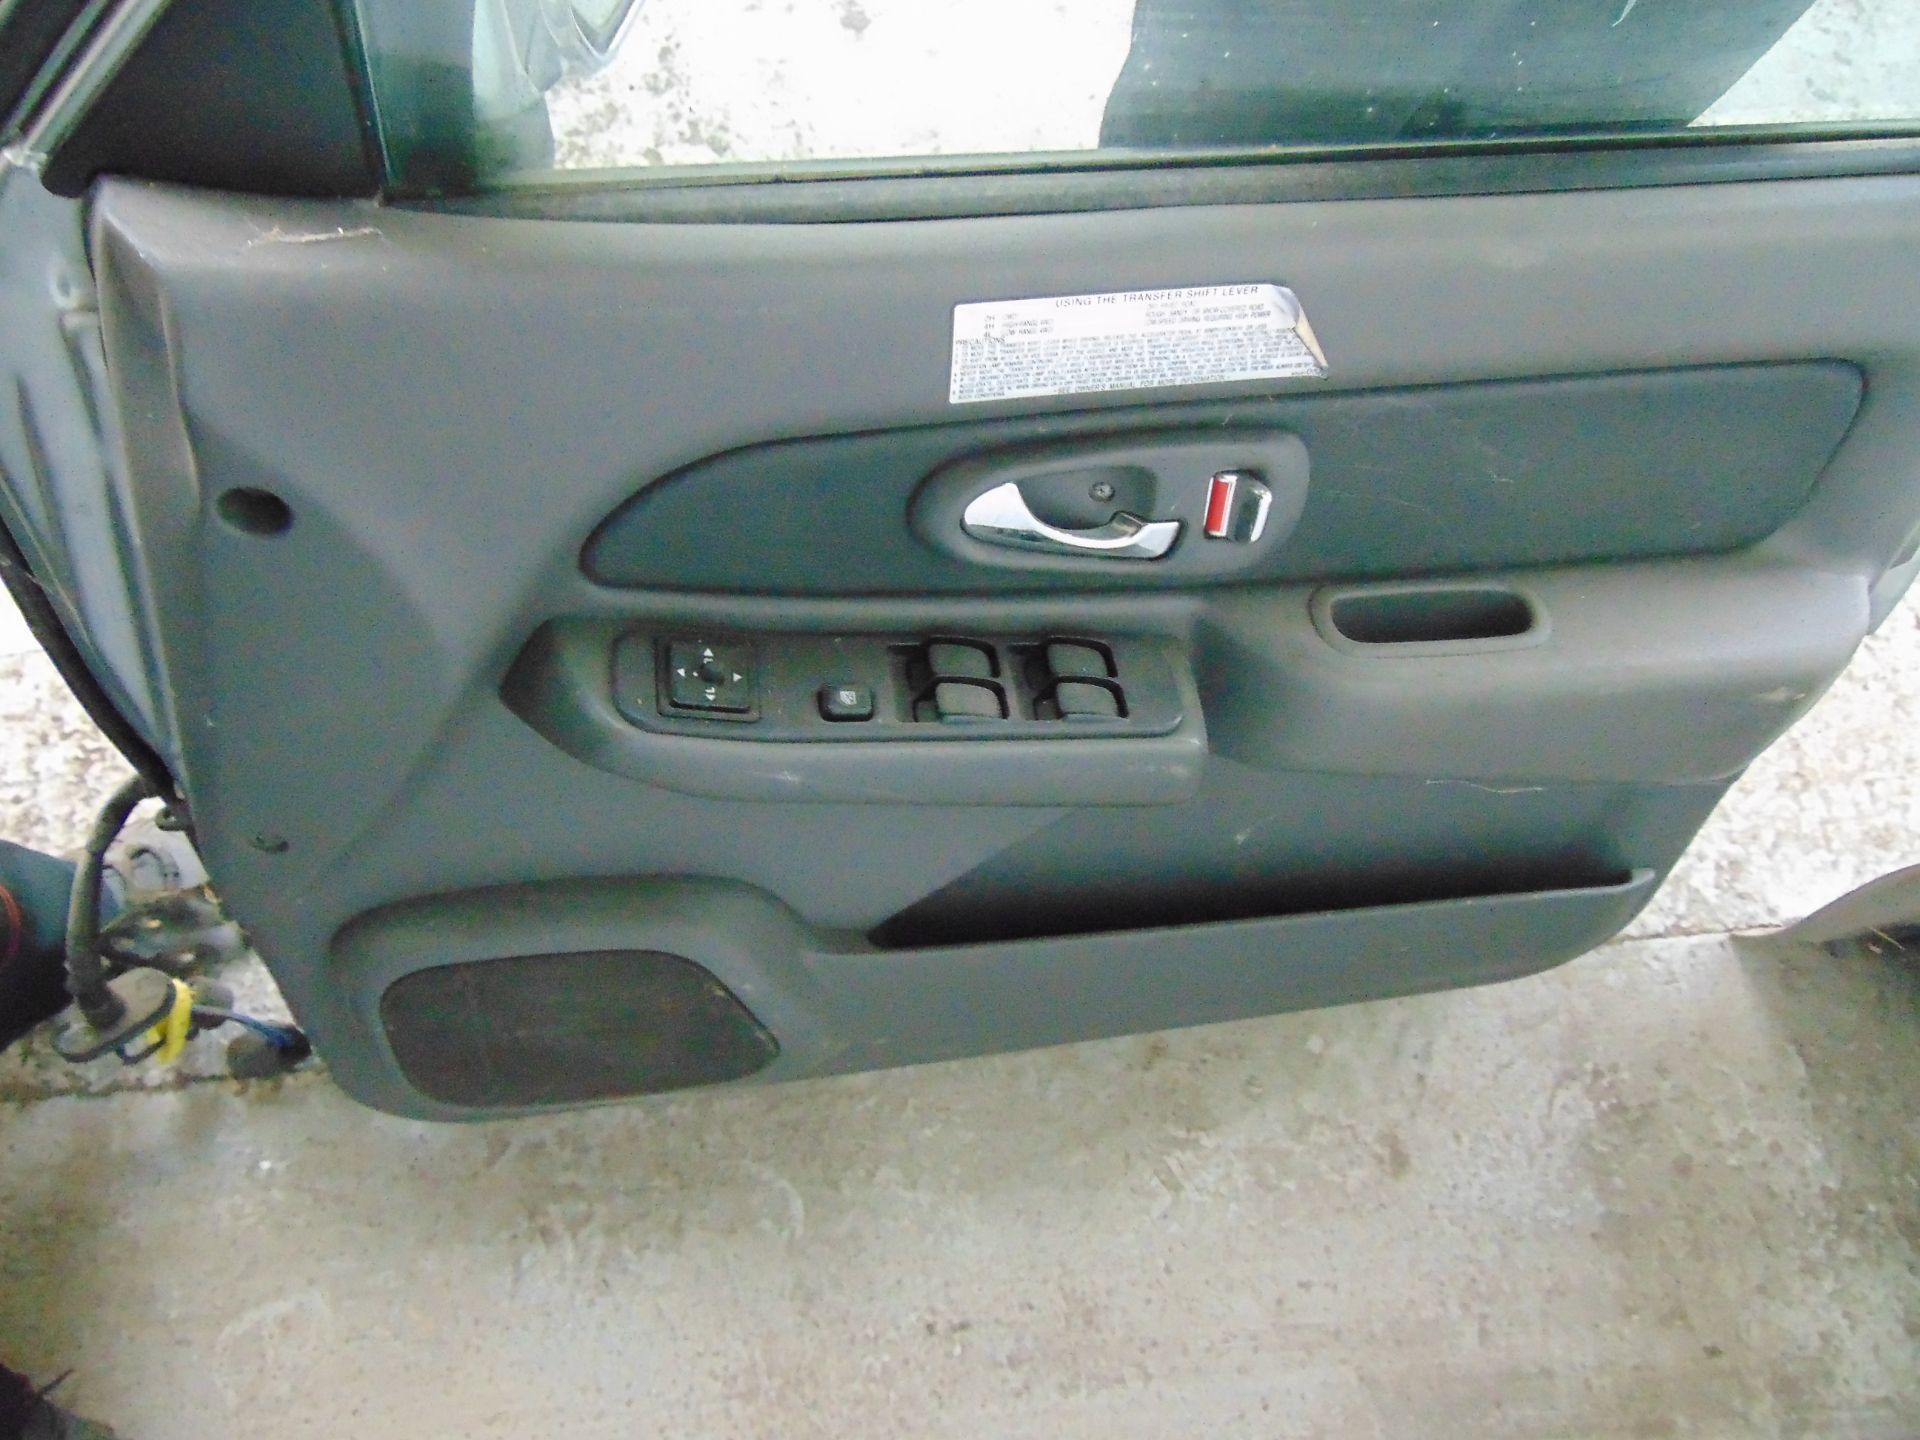 L200 warrior doors in silver o/s front o/s rear n/s front n/s rear and tailgate - Image 10 of 12